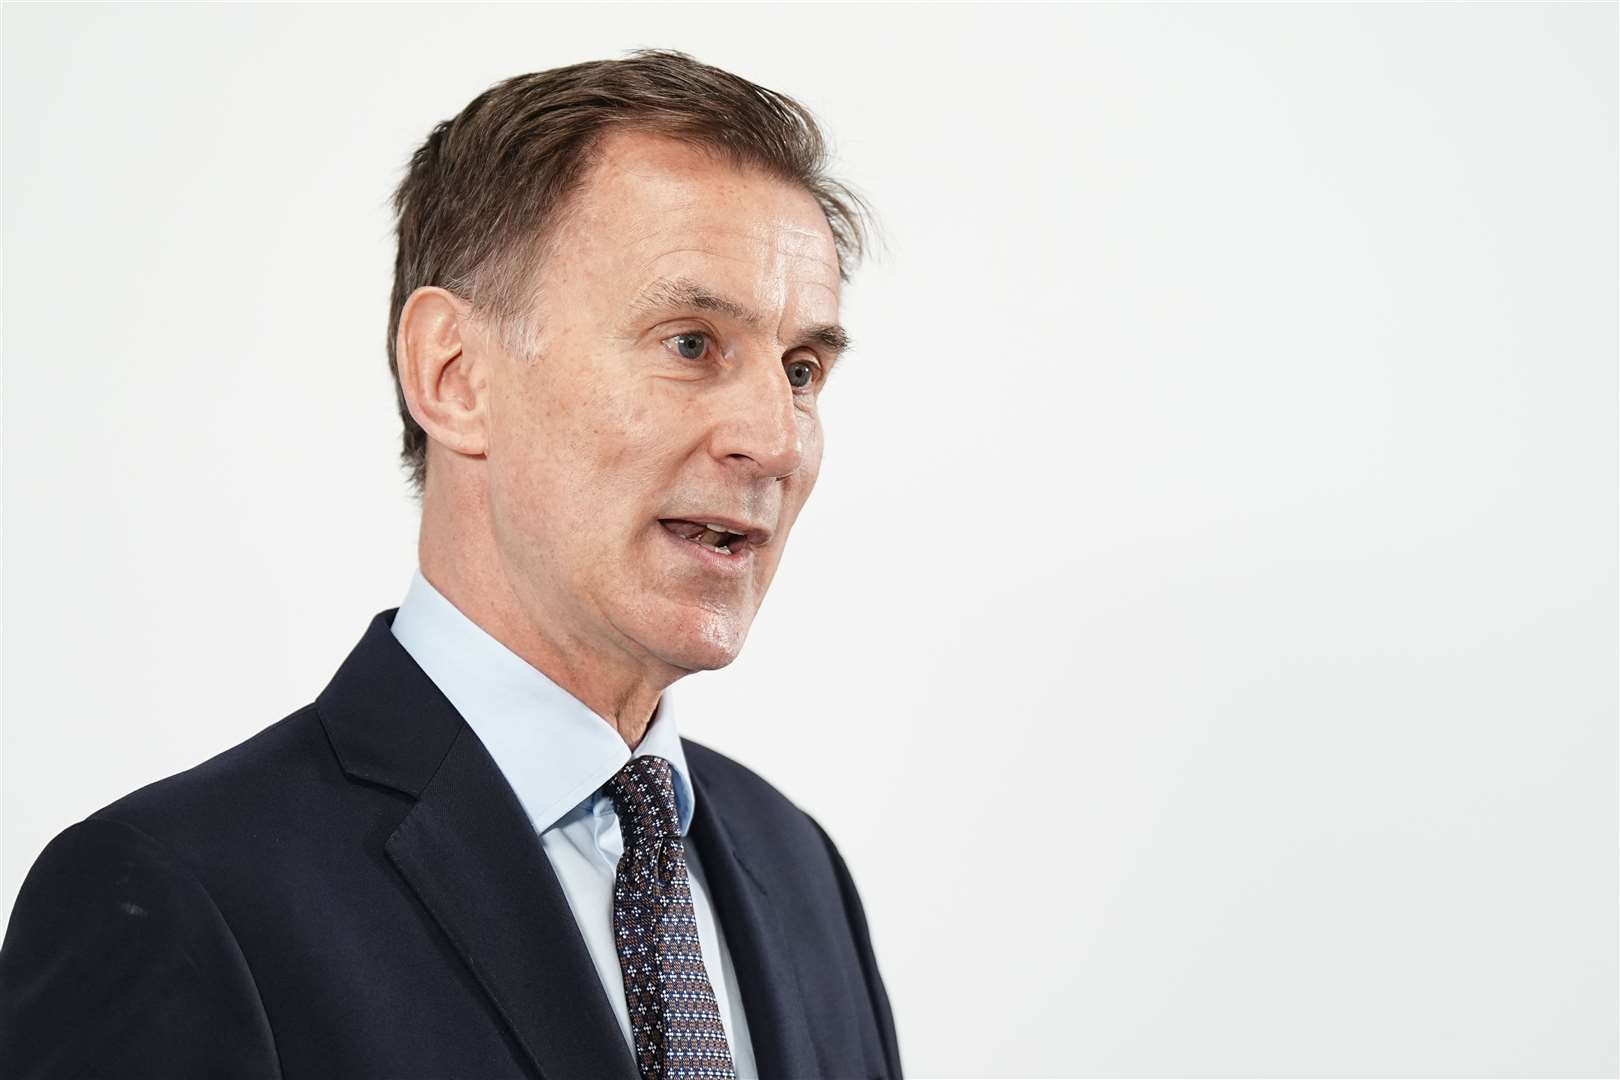 Chancellor Jeremy Hunt said the Government would support ‘sustainable increases’ in foreign student numbers (Aaron Chown/PA)